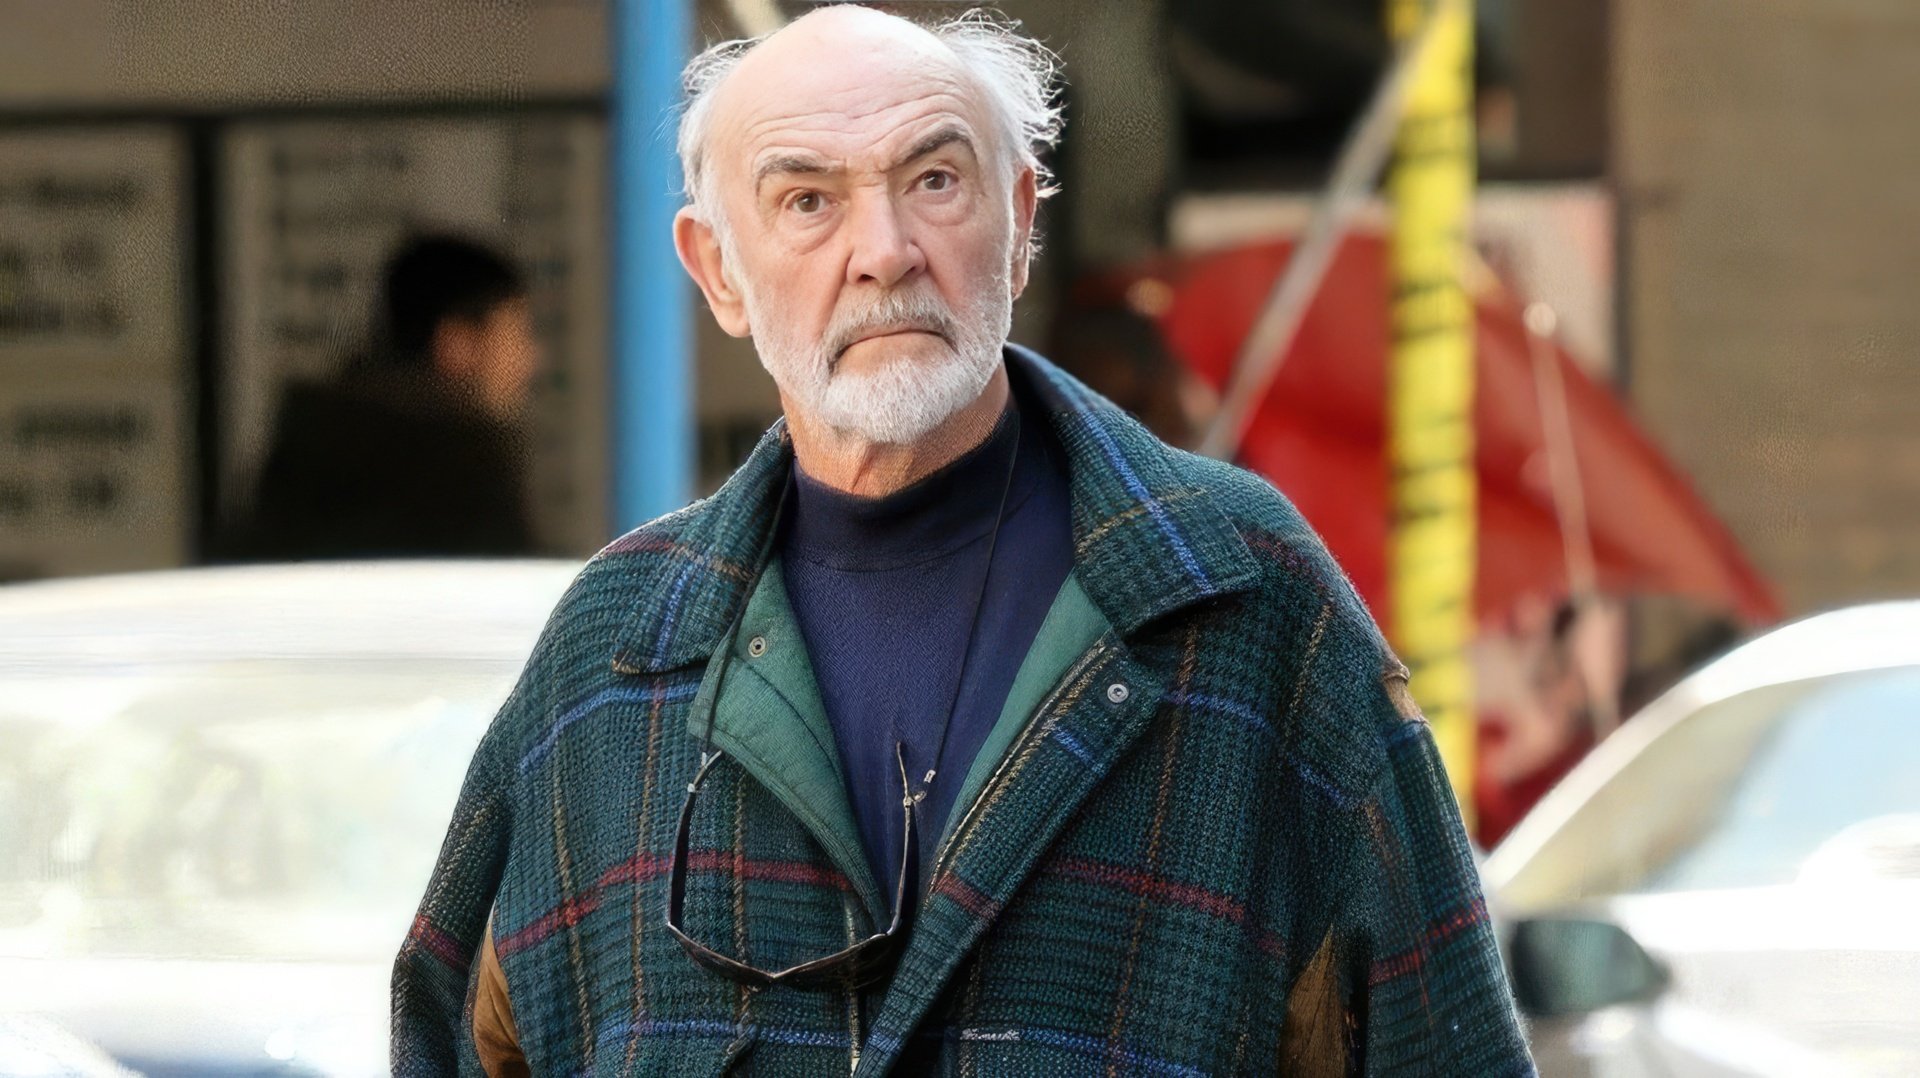 Sean Connery died after 2 months since 90th anniversary